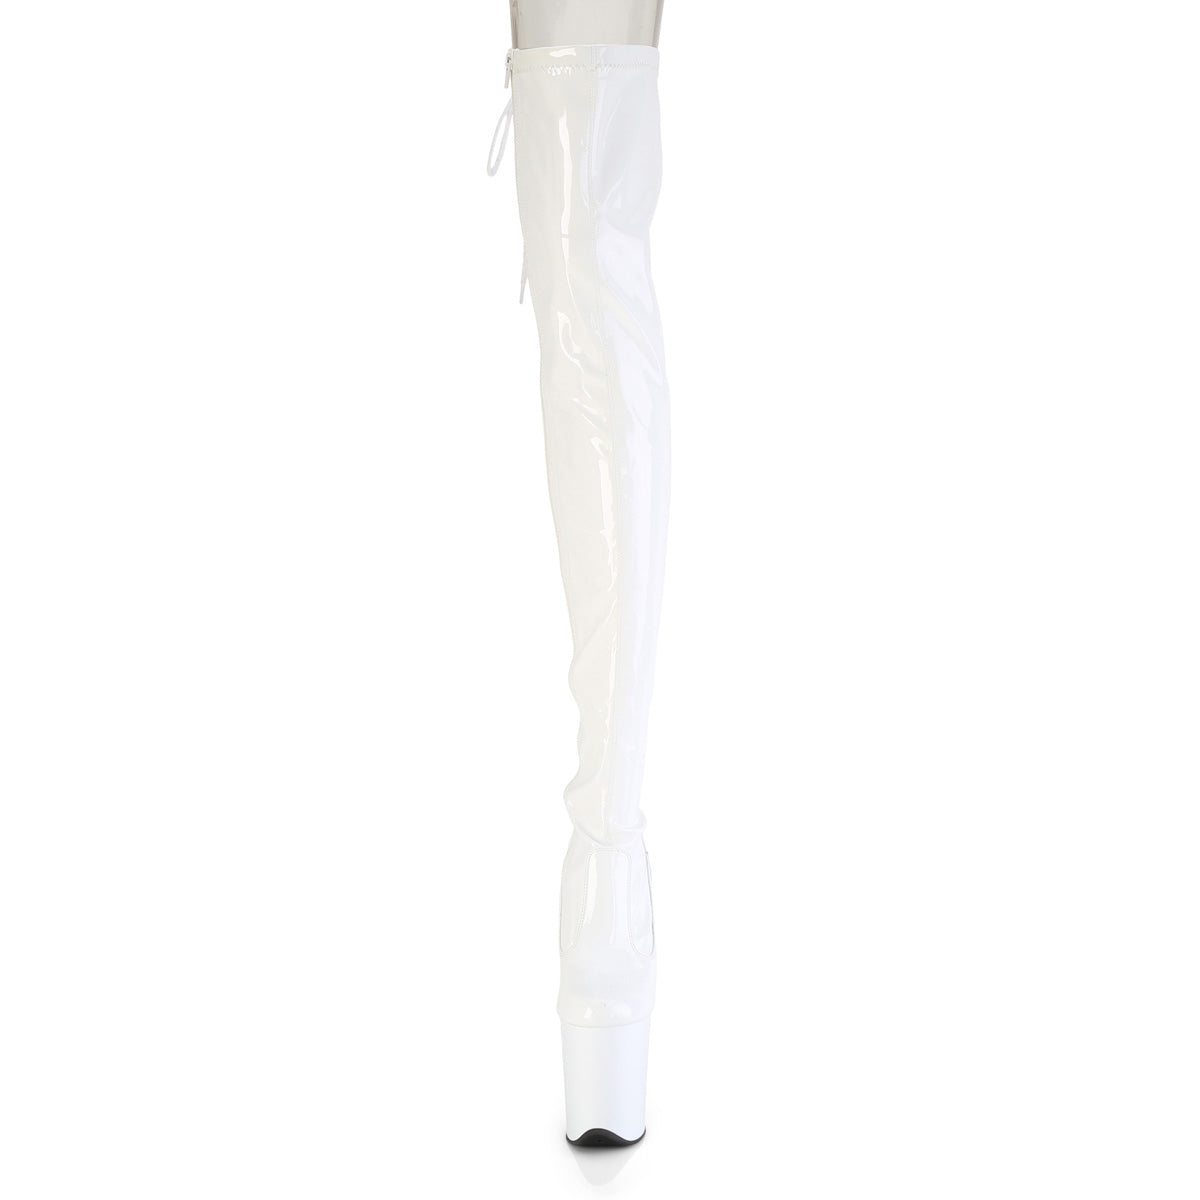 FLAMINGO-3850 White Pleaser Pole Dancing Thigh High Boots